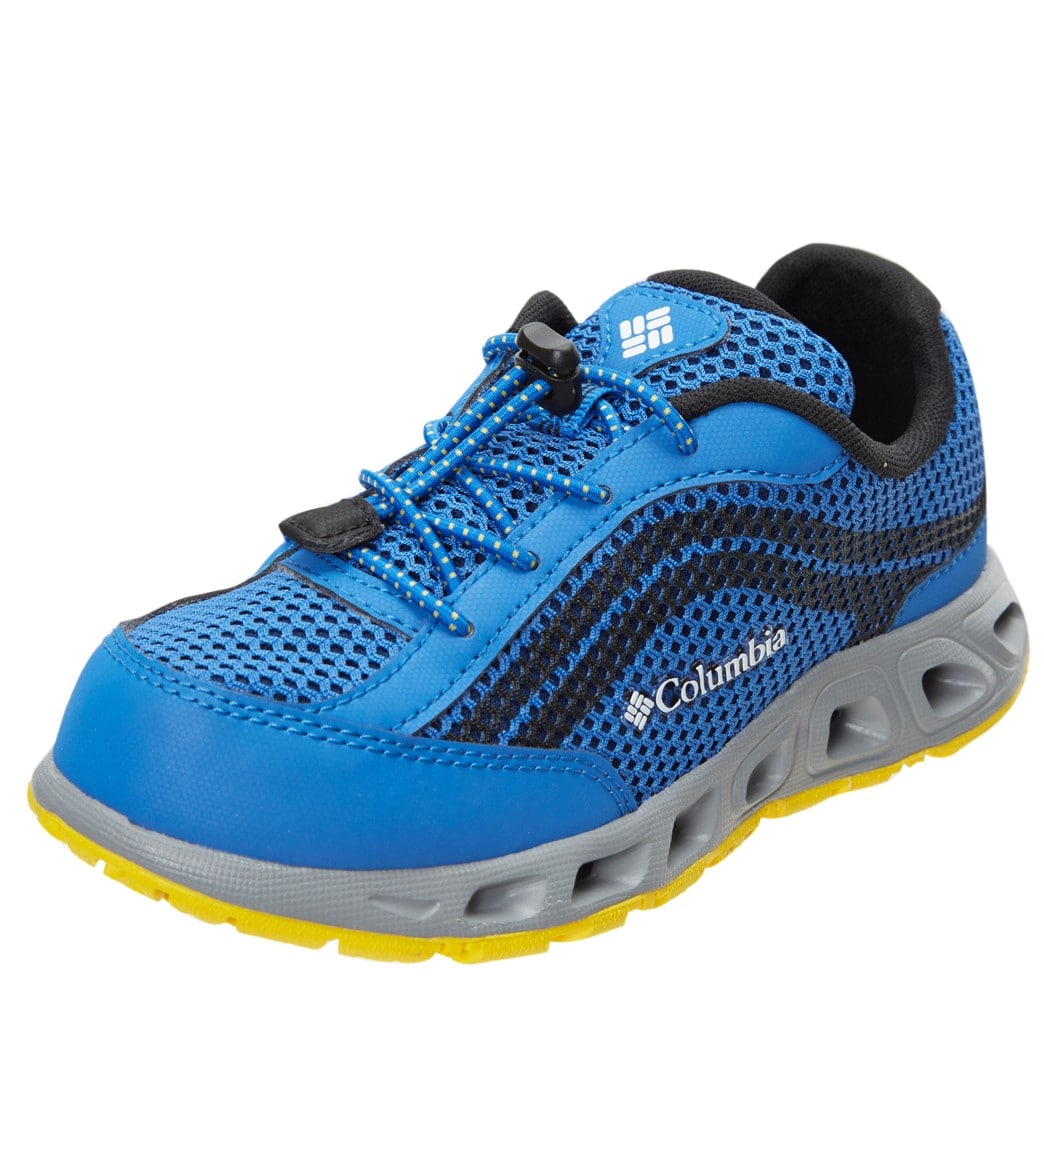 Columbia Youth Drainmaker Iv Water Shoe - Stormy Blue Deep Yellow 4 Blue - Swimoutlet.com